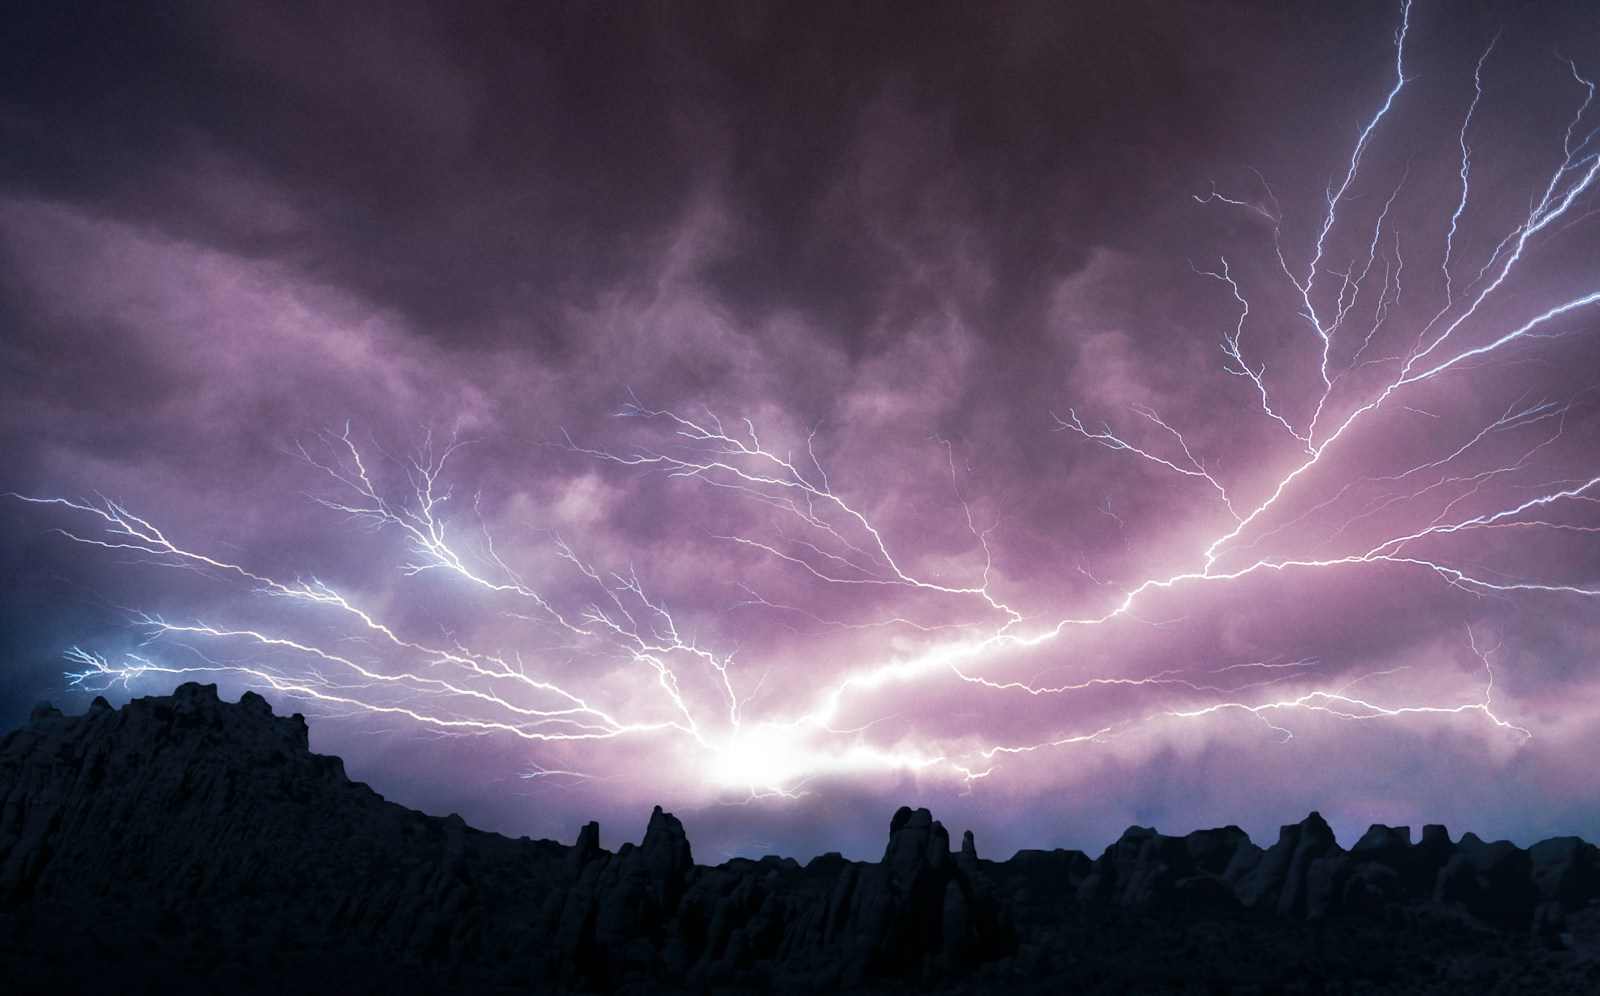 Lightning Strikes! Prepare, Don’t Fear: A Guide to Lightning Safety and Awareness